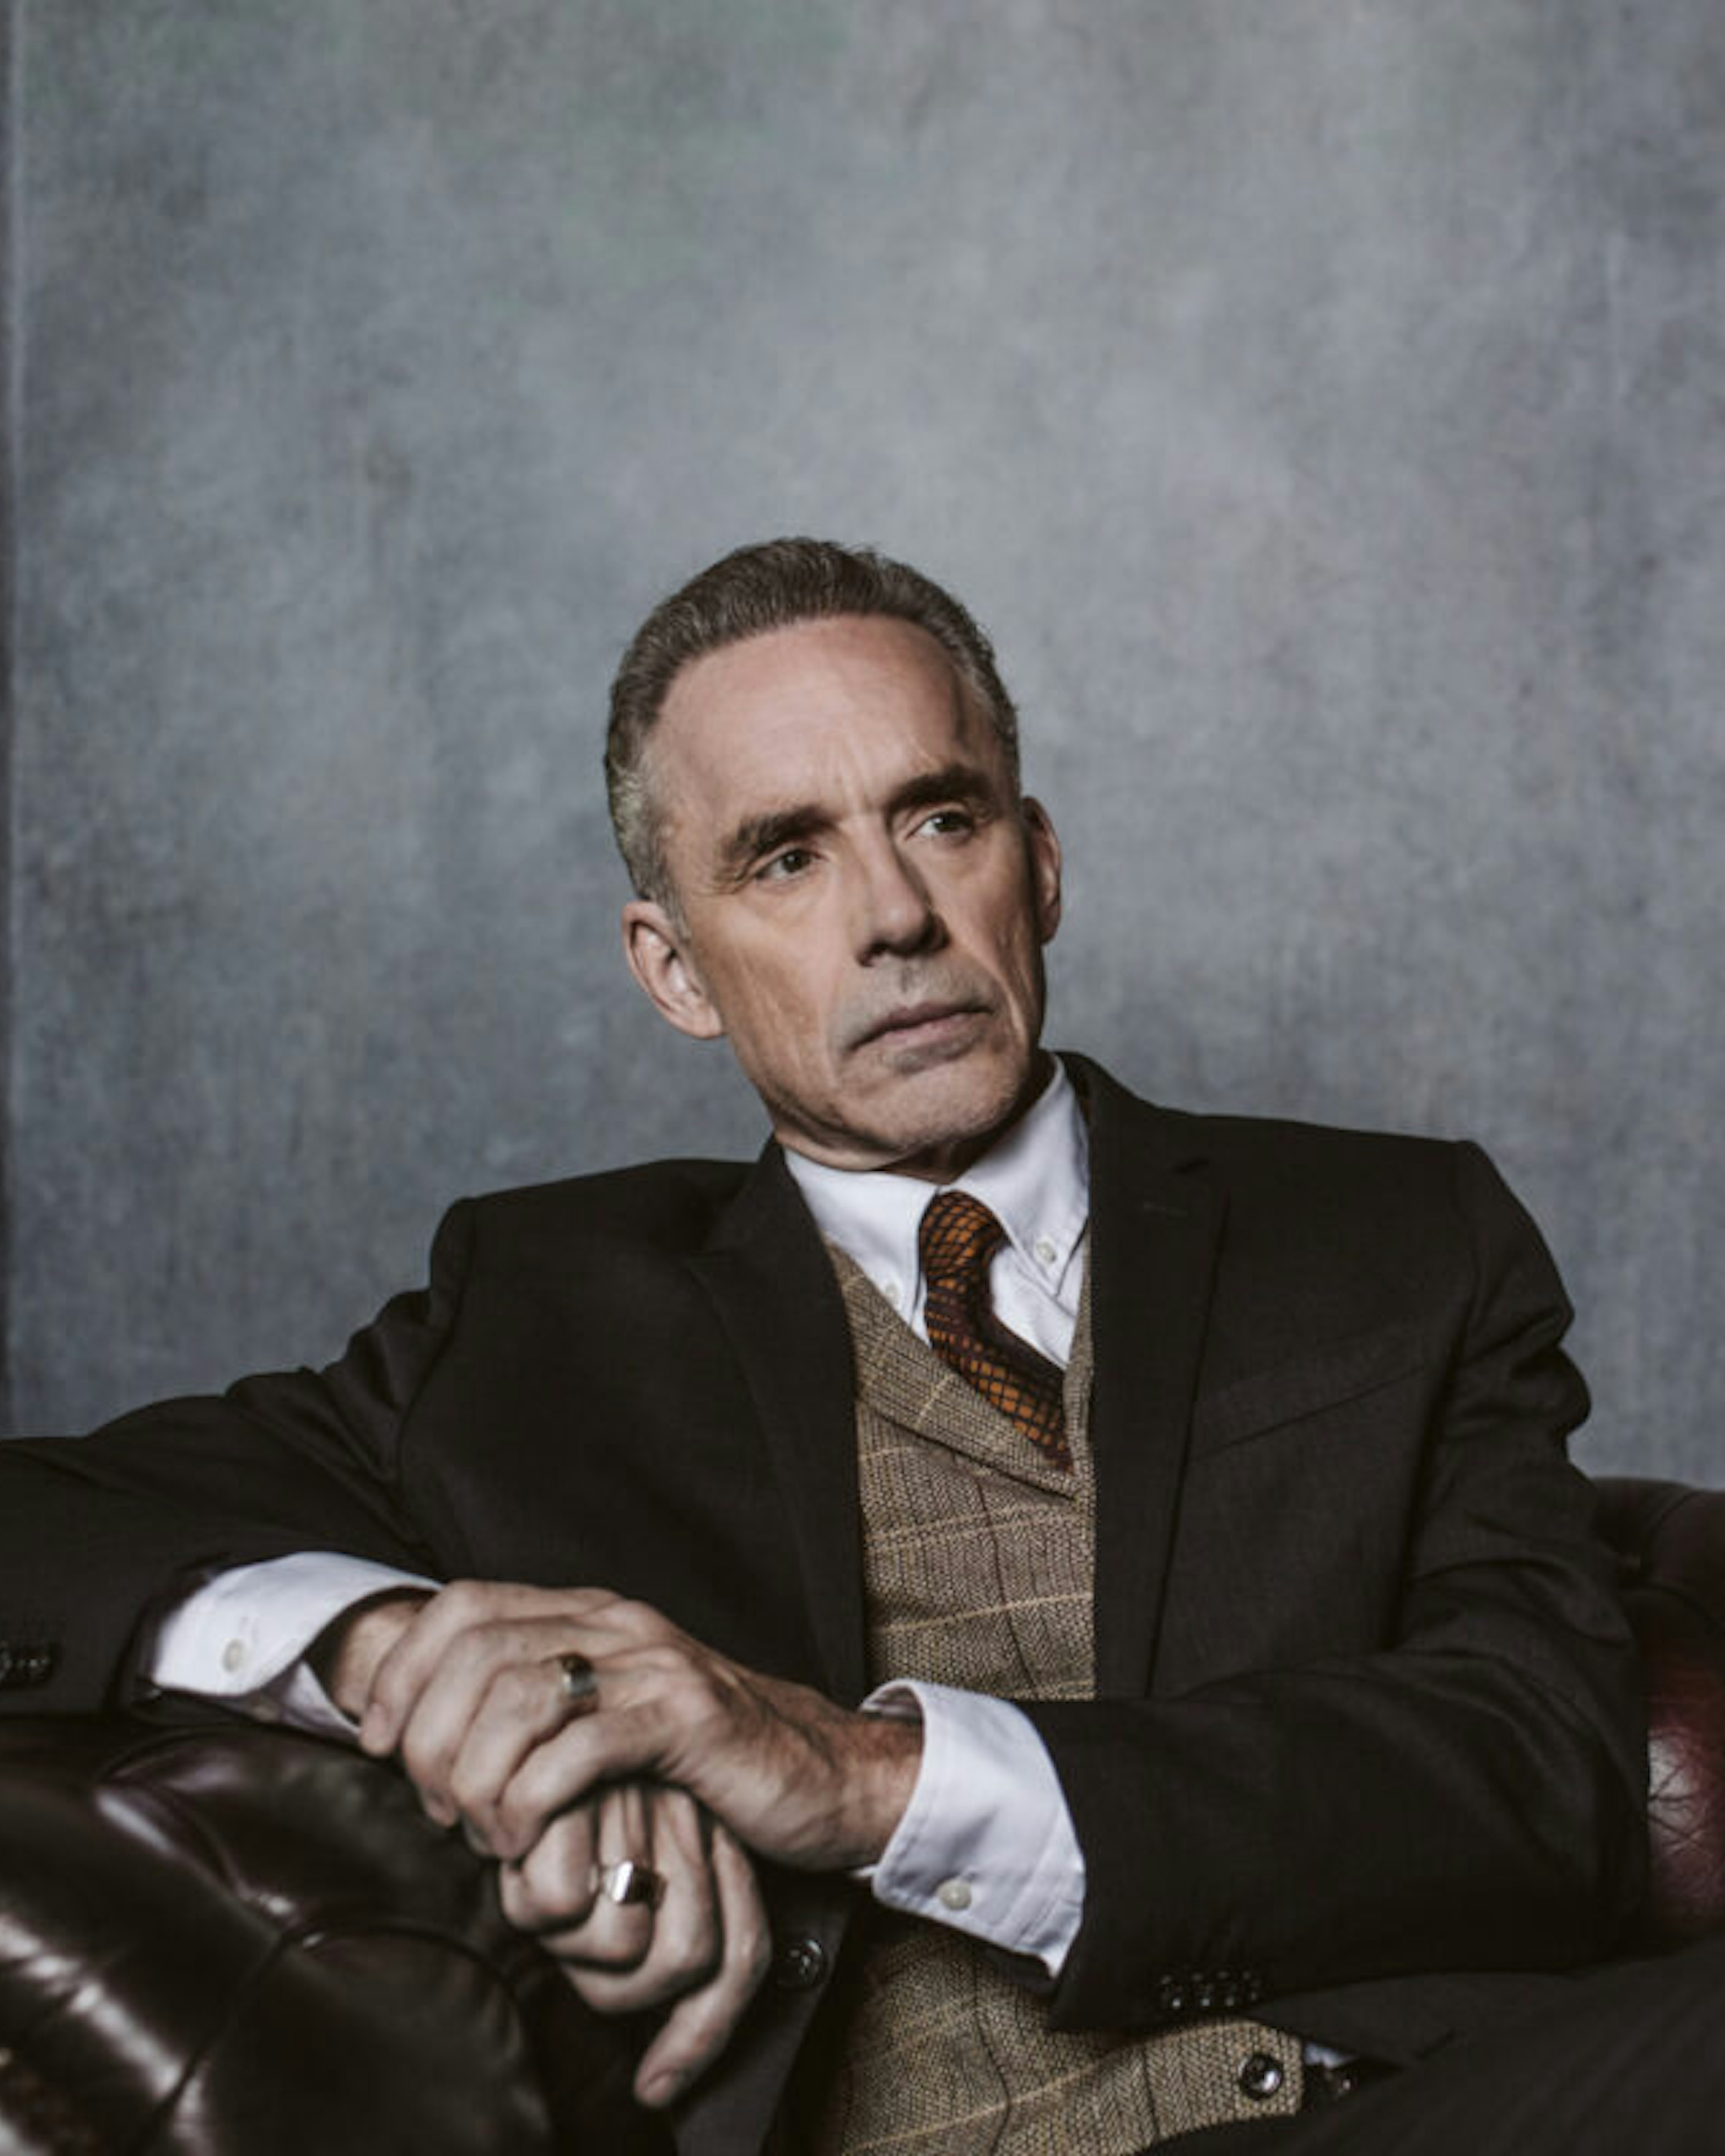 Jordan Peterson, who just joined DailyWire+, sat down with Megan Basham for an exclusive interview